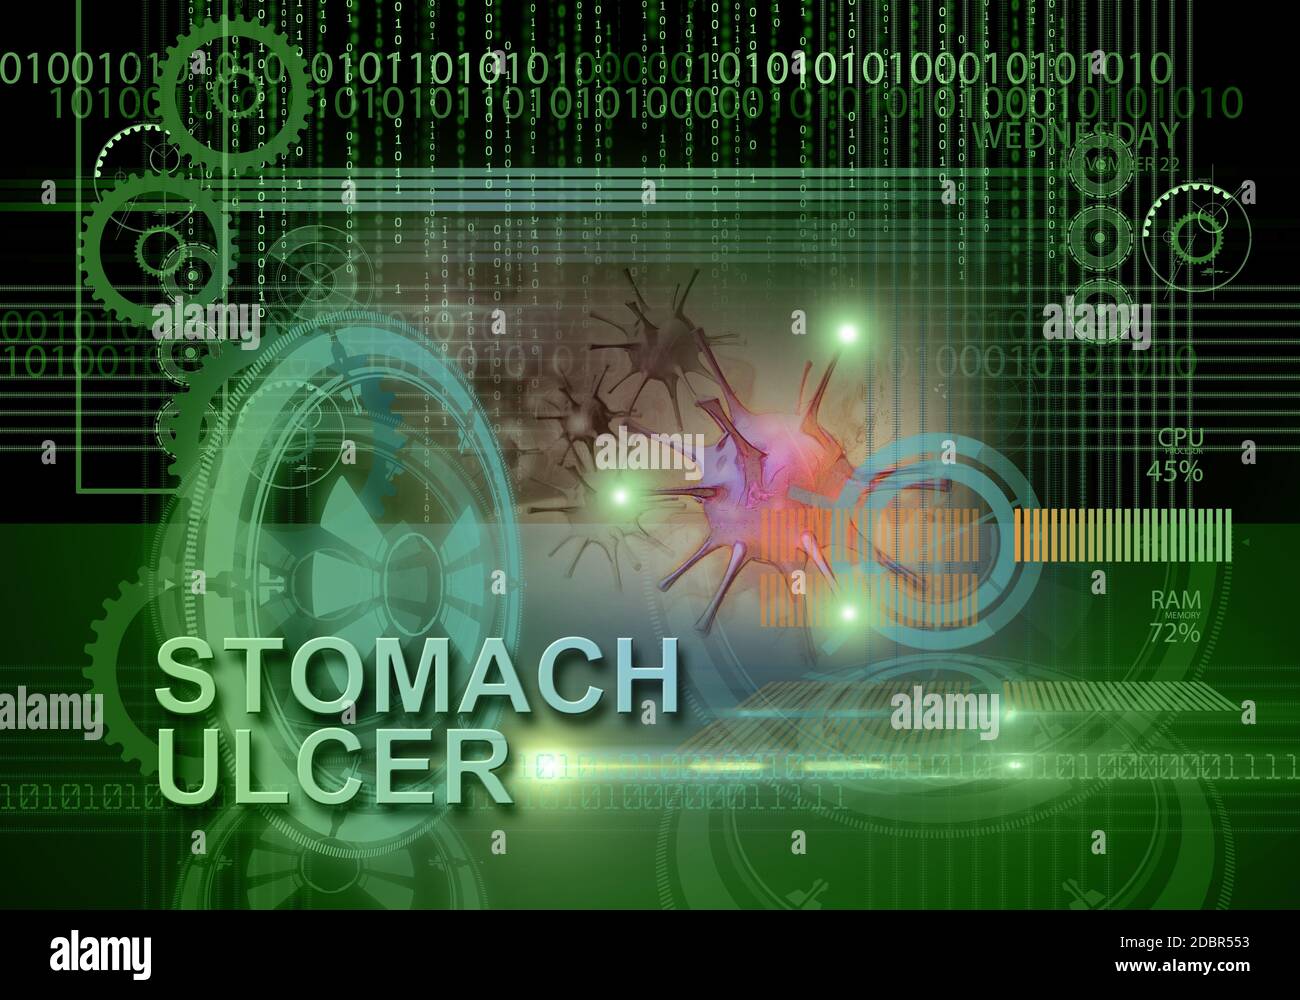 hi tech infographics of stomach ulcer made in 3d software Stock Photo